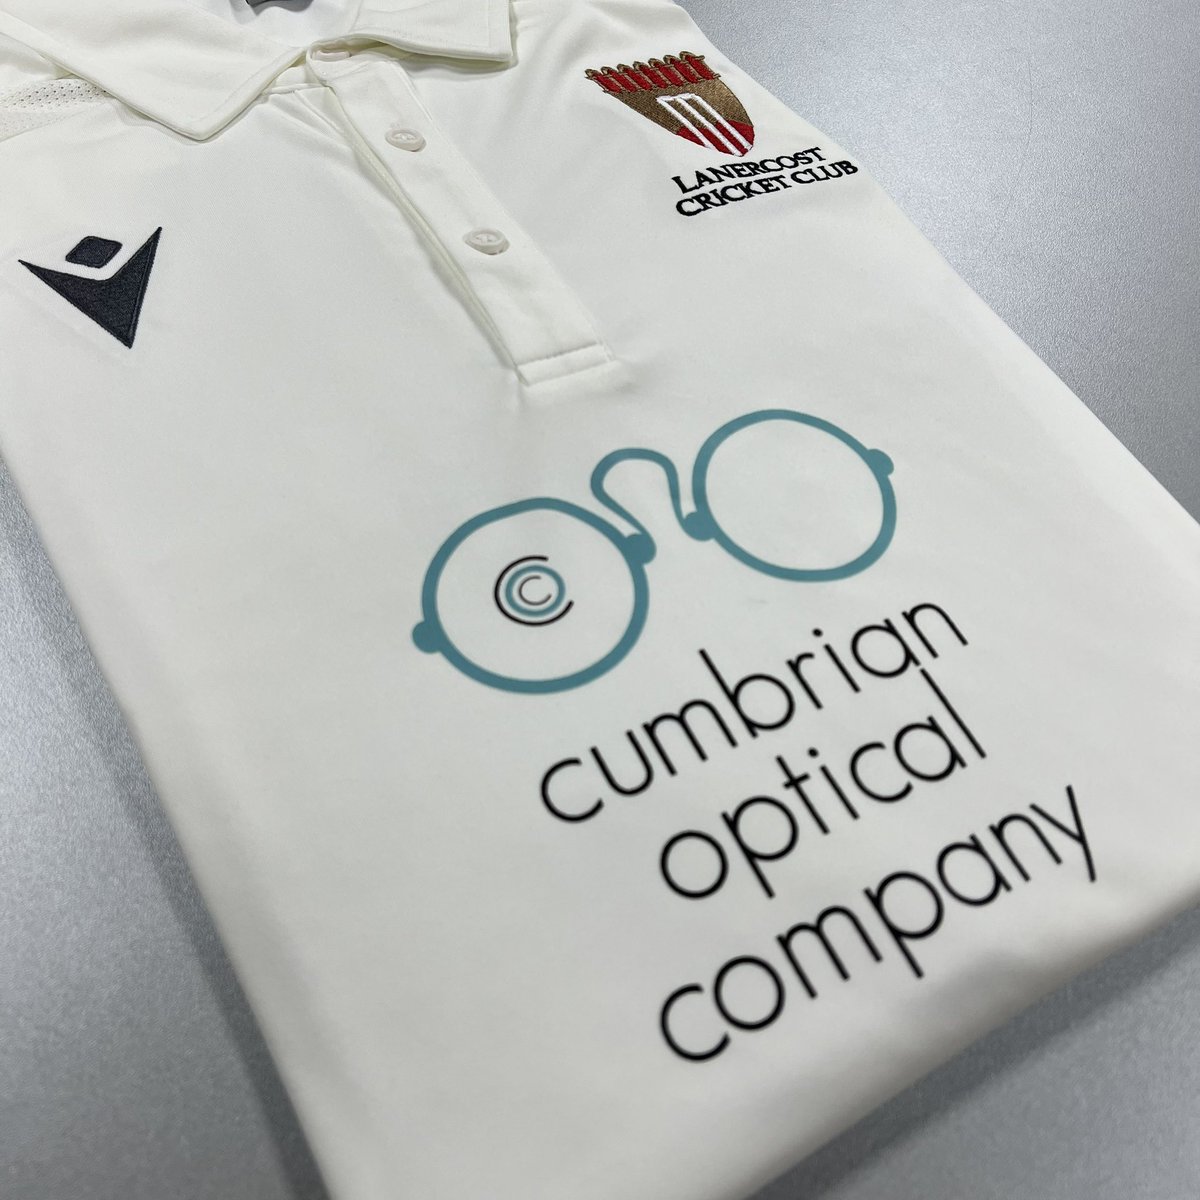 Another set of cricket orders 🏏 leaving the Sports Hub this afternoon for Cumbria based @LanercostSC

@LanercostSC x @MacronSports

Sponsored by Cumbrian Optical Company 👓

#BeYourOwnHero #WorkHardPlayHarder